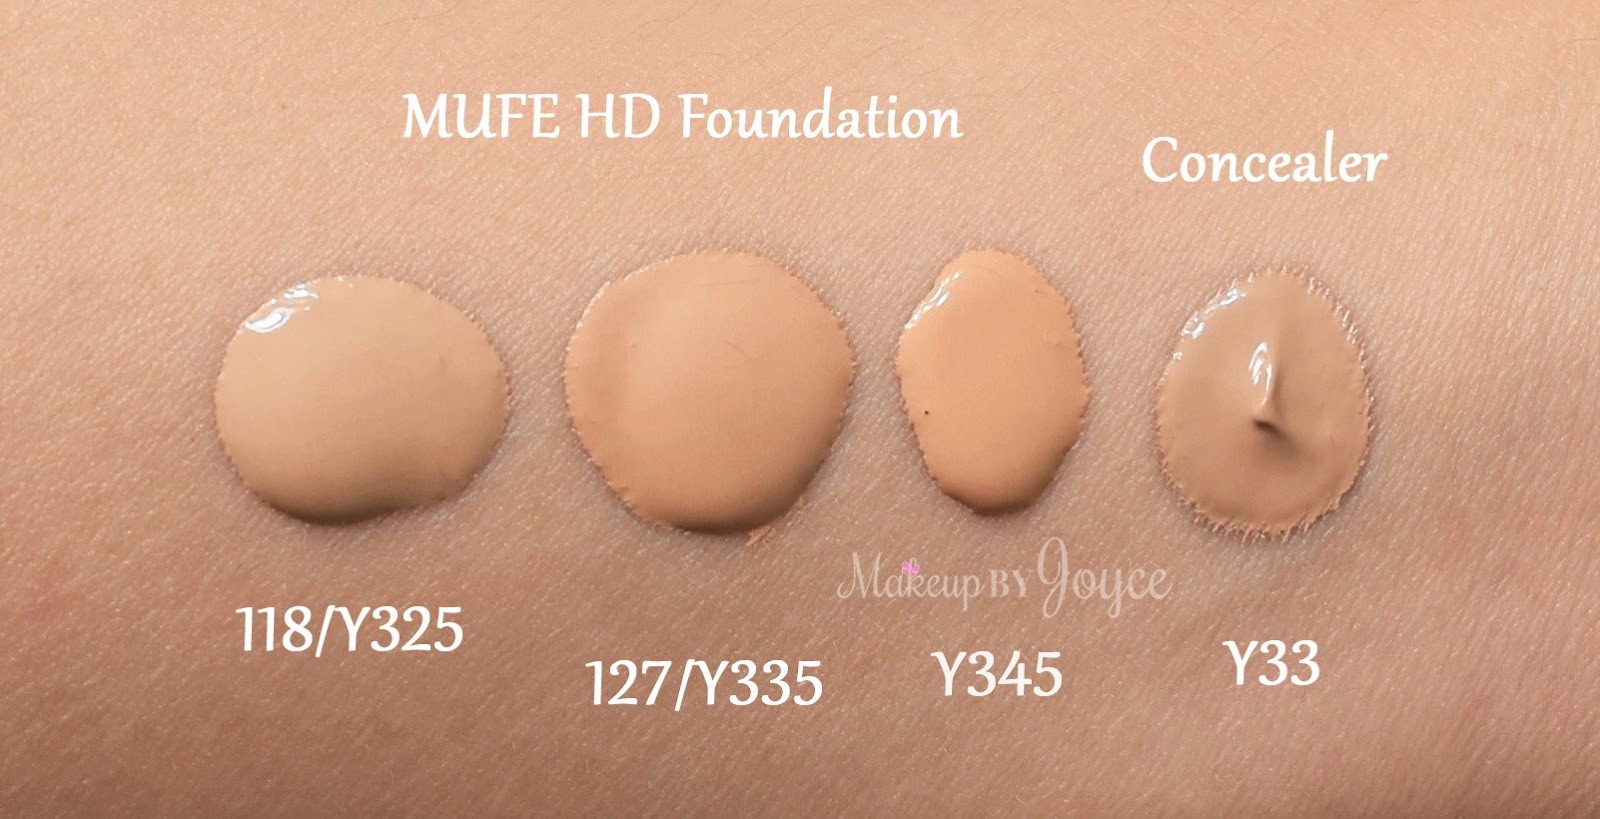 ❤ MakeupByJoyce ❤** !: Swatches + Review: Collective Haul (MUFE